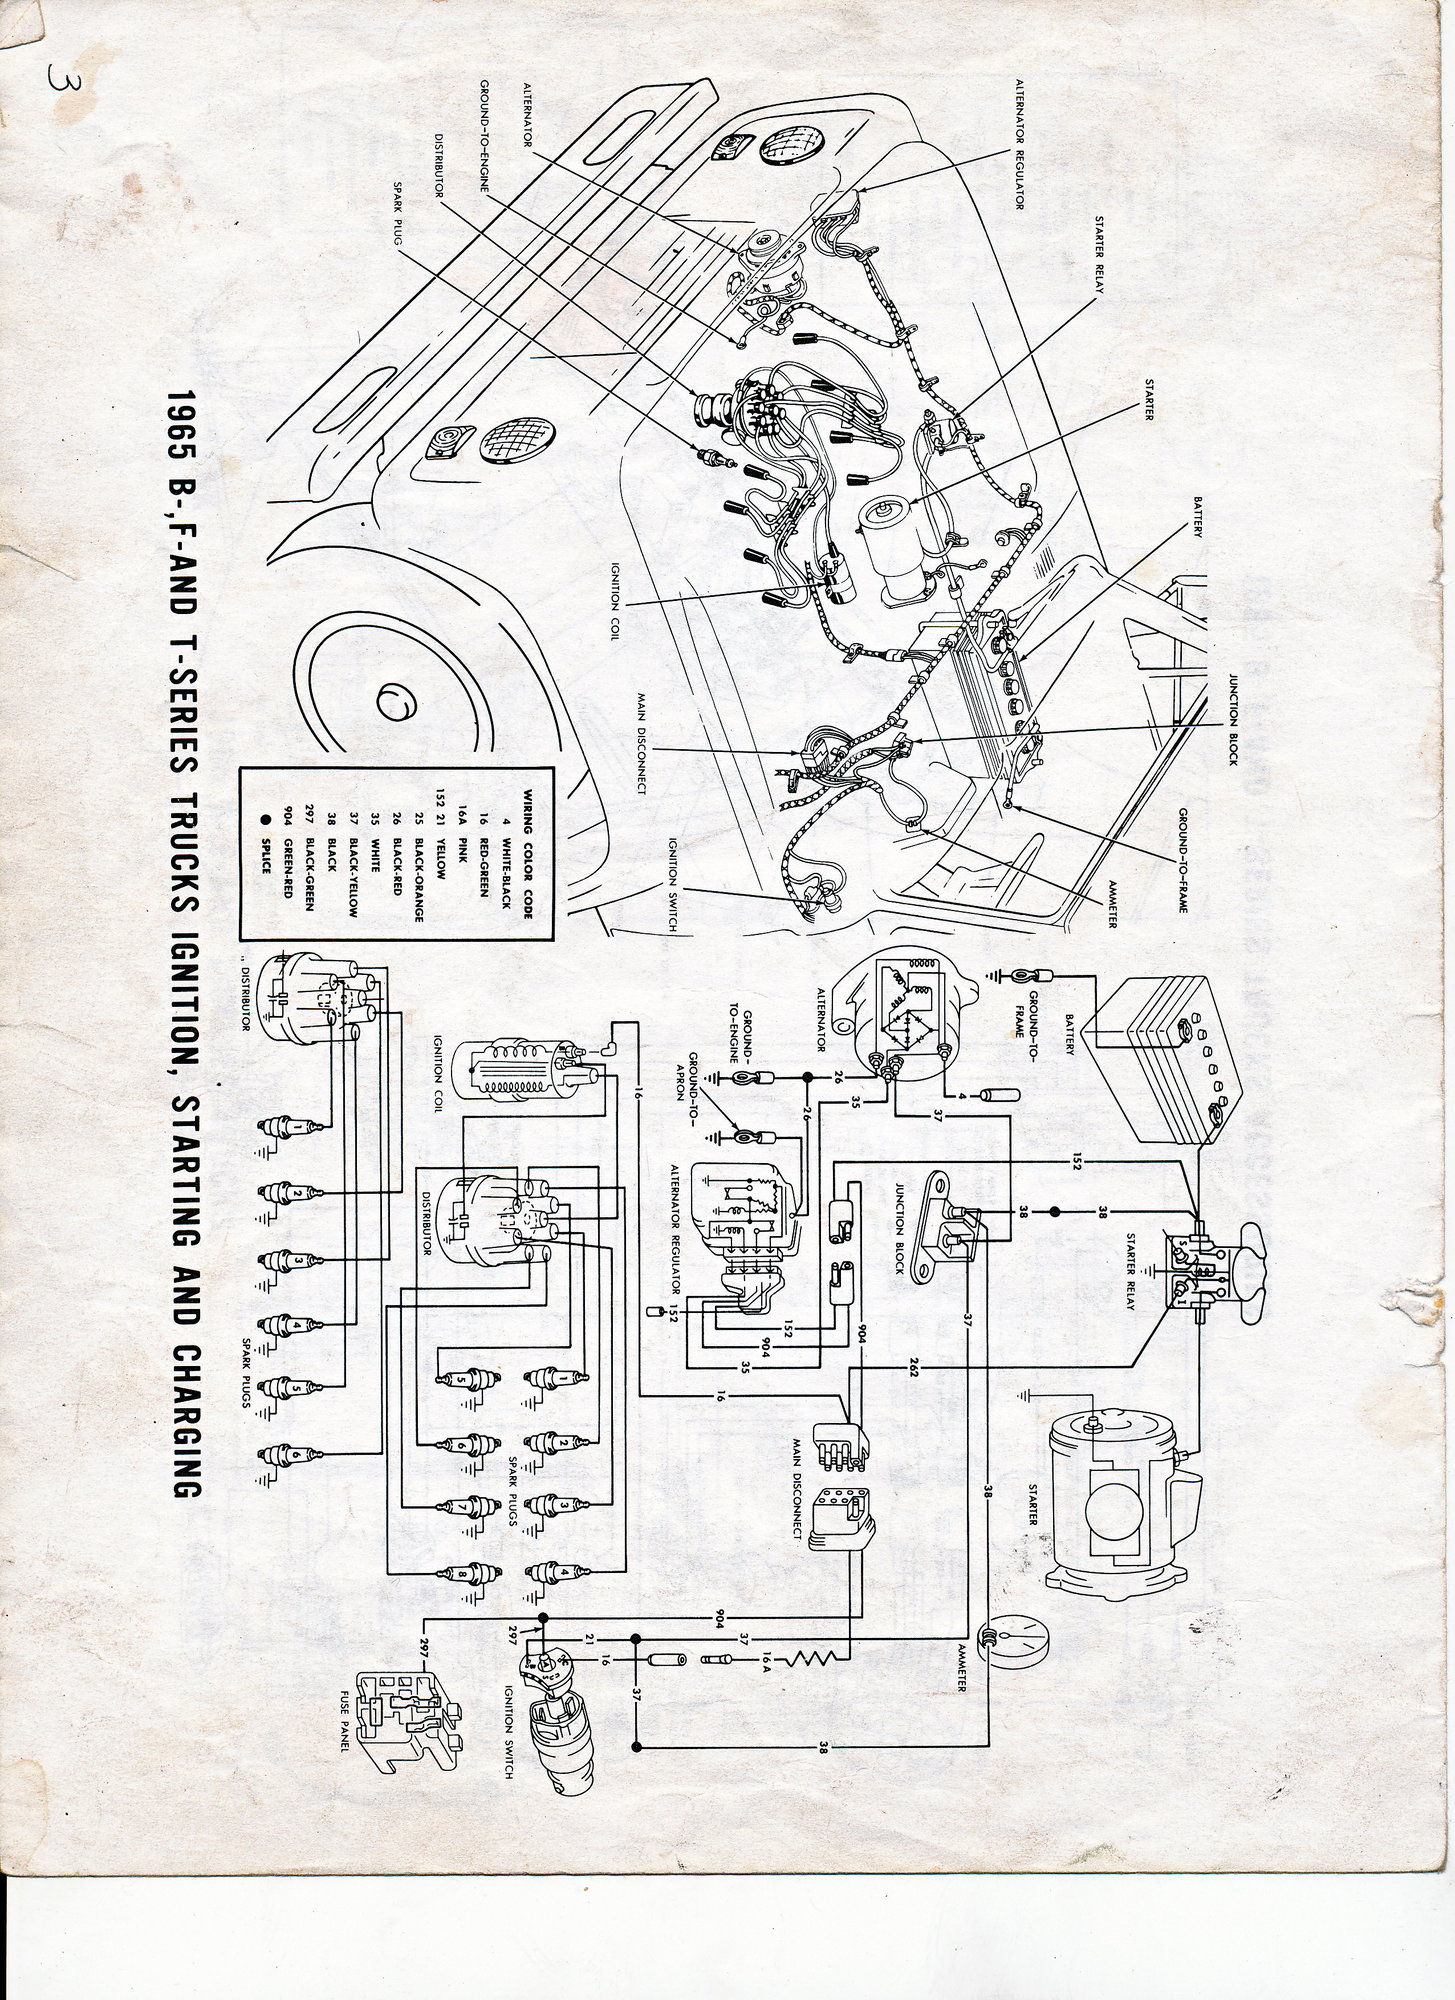 1965 solenoid wiring? - Ford Truck Enthusiasts Forums